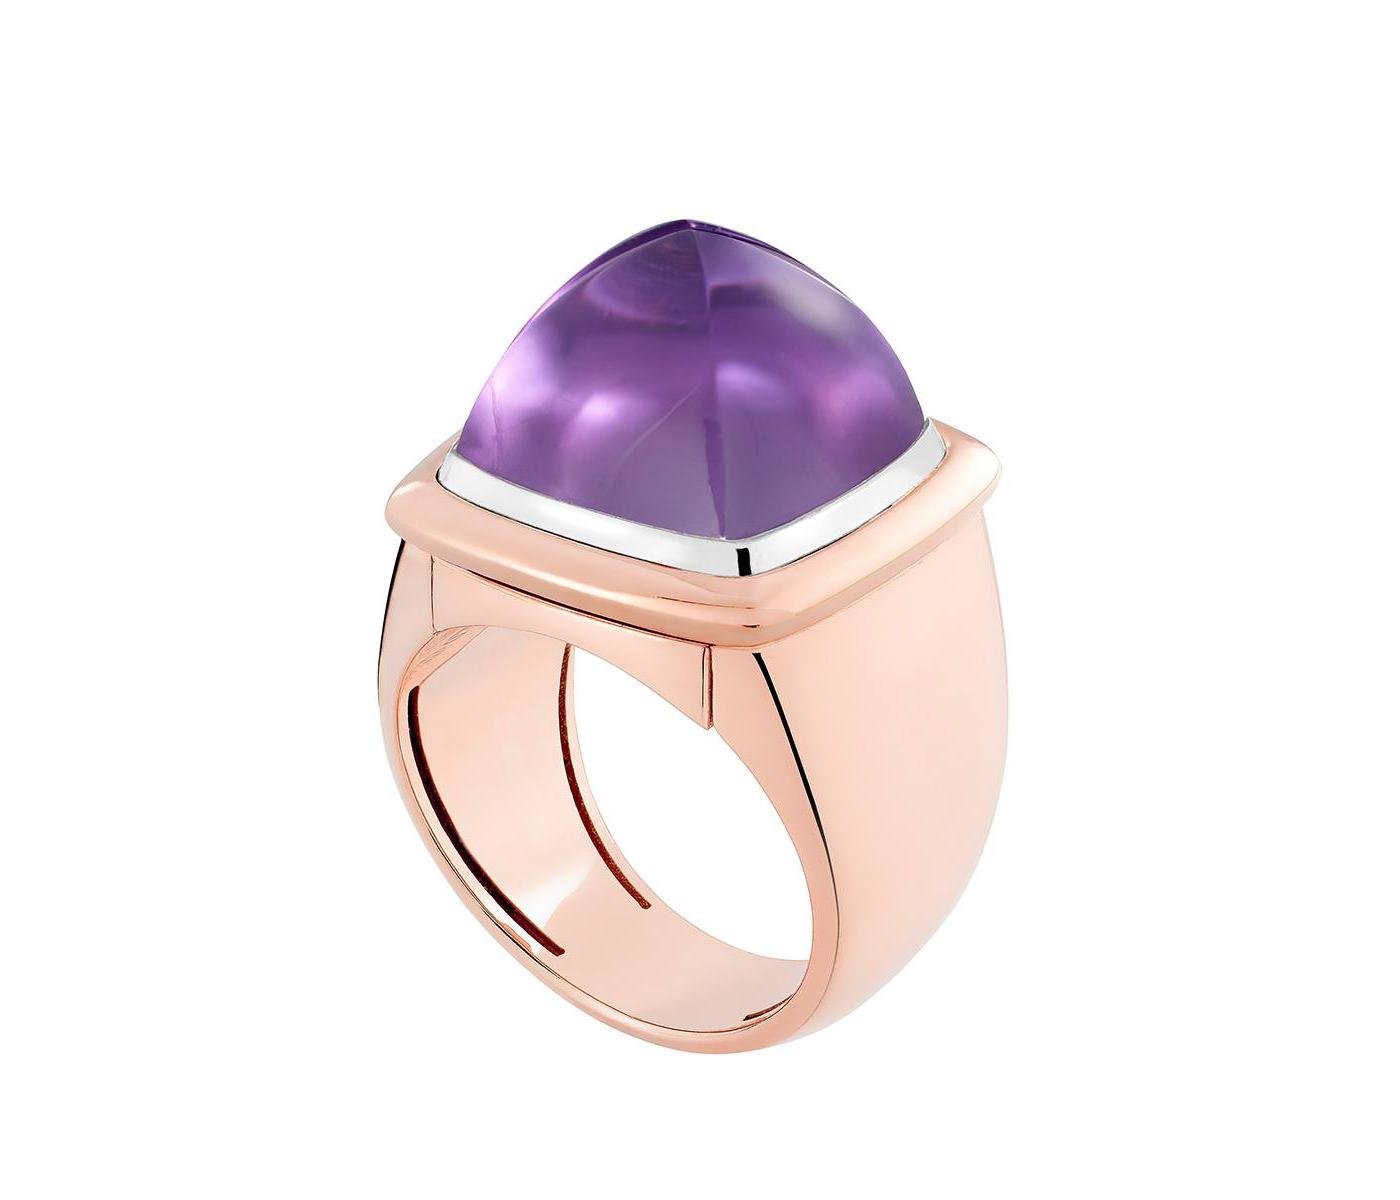 Ring by Fred Paris